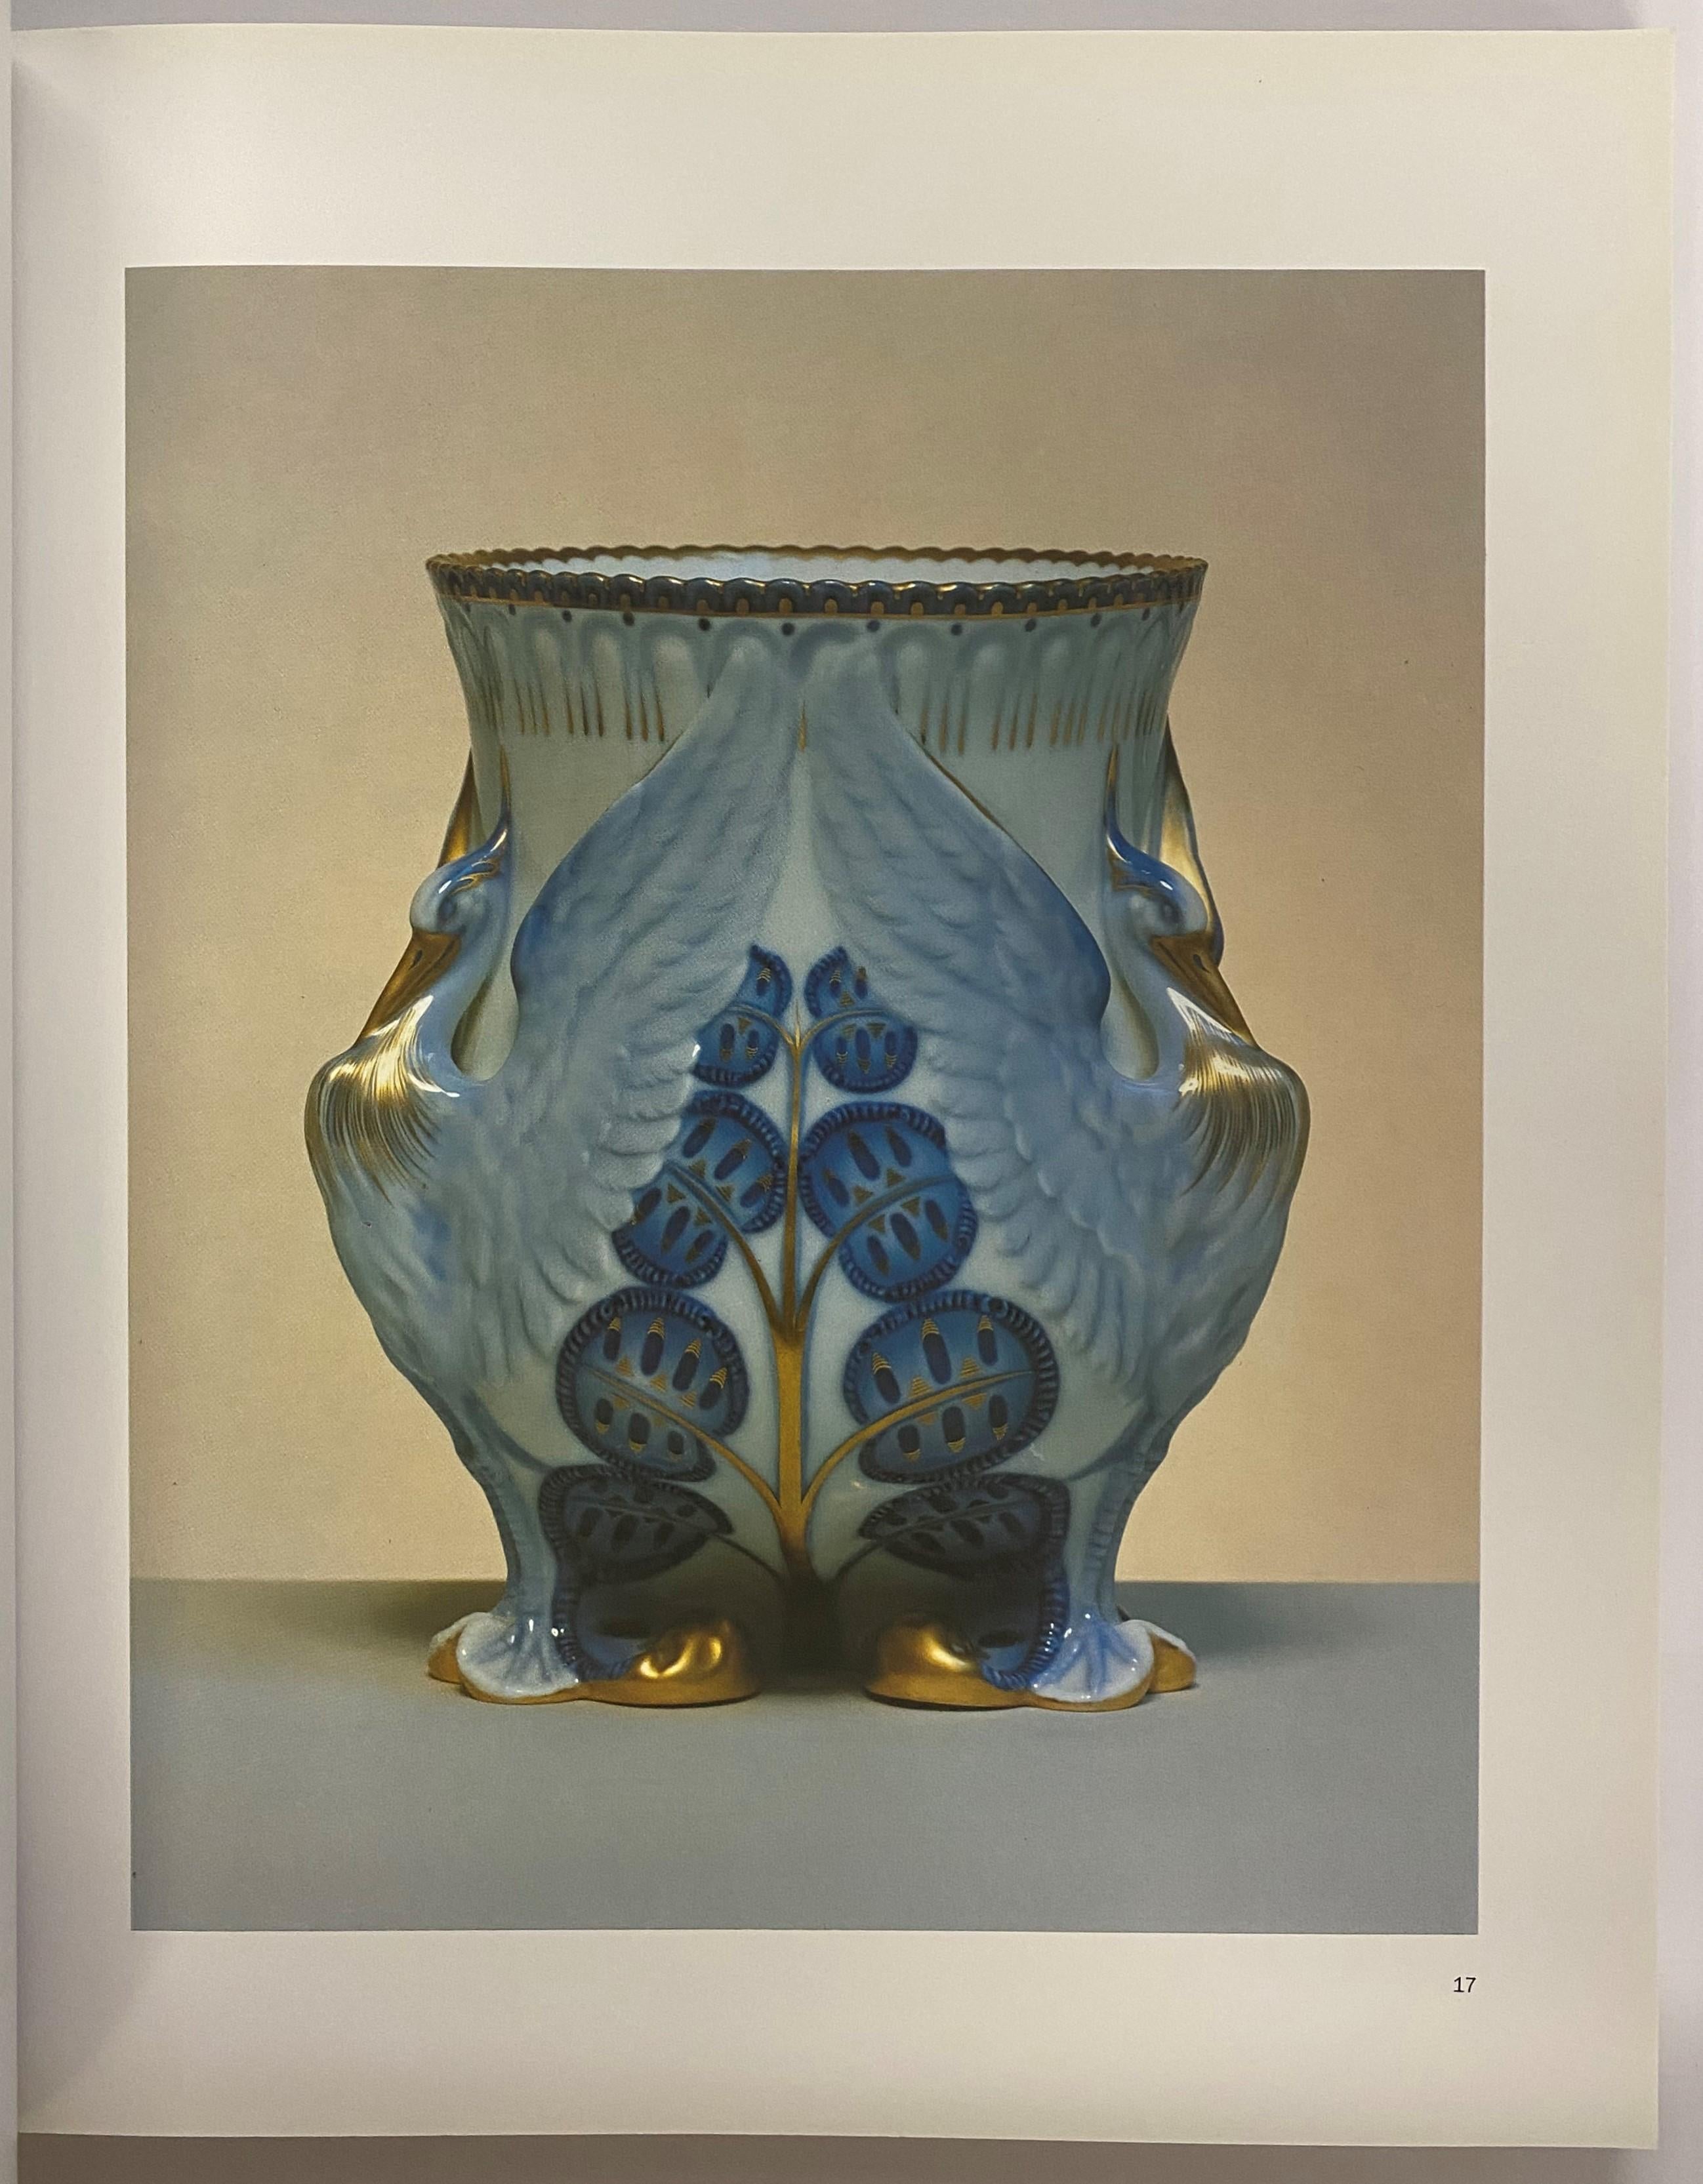 by Jennifer Hawkins Opis 
This is a comprehensive catalogue of the Scandinavian Ceramics and Glass collection at the V&A, showing comparative material from all four Scandinavian countries. The history of the many ceramics and glass factories, their